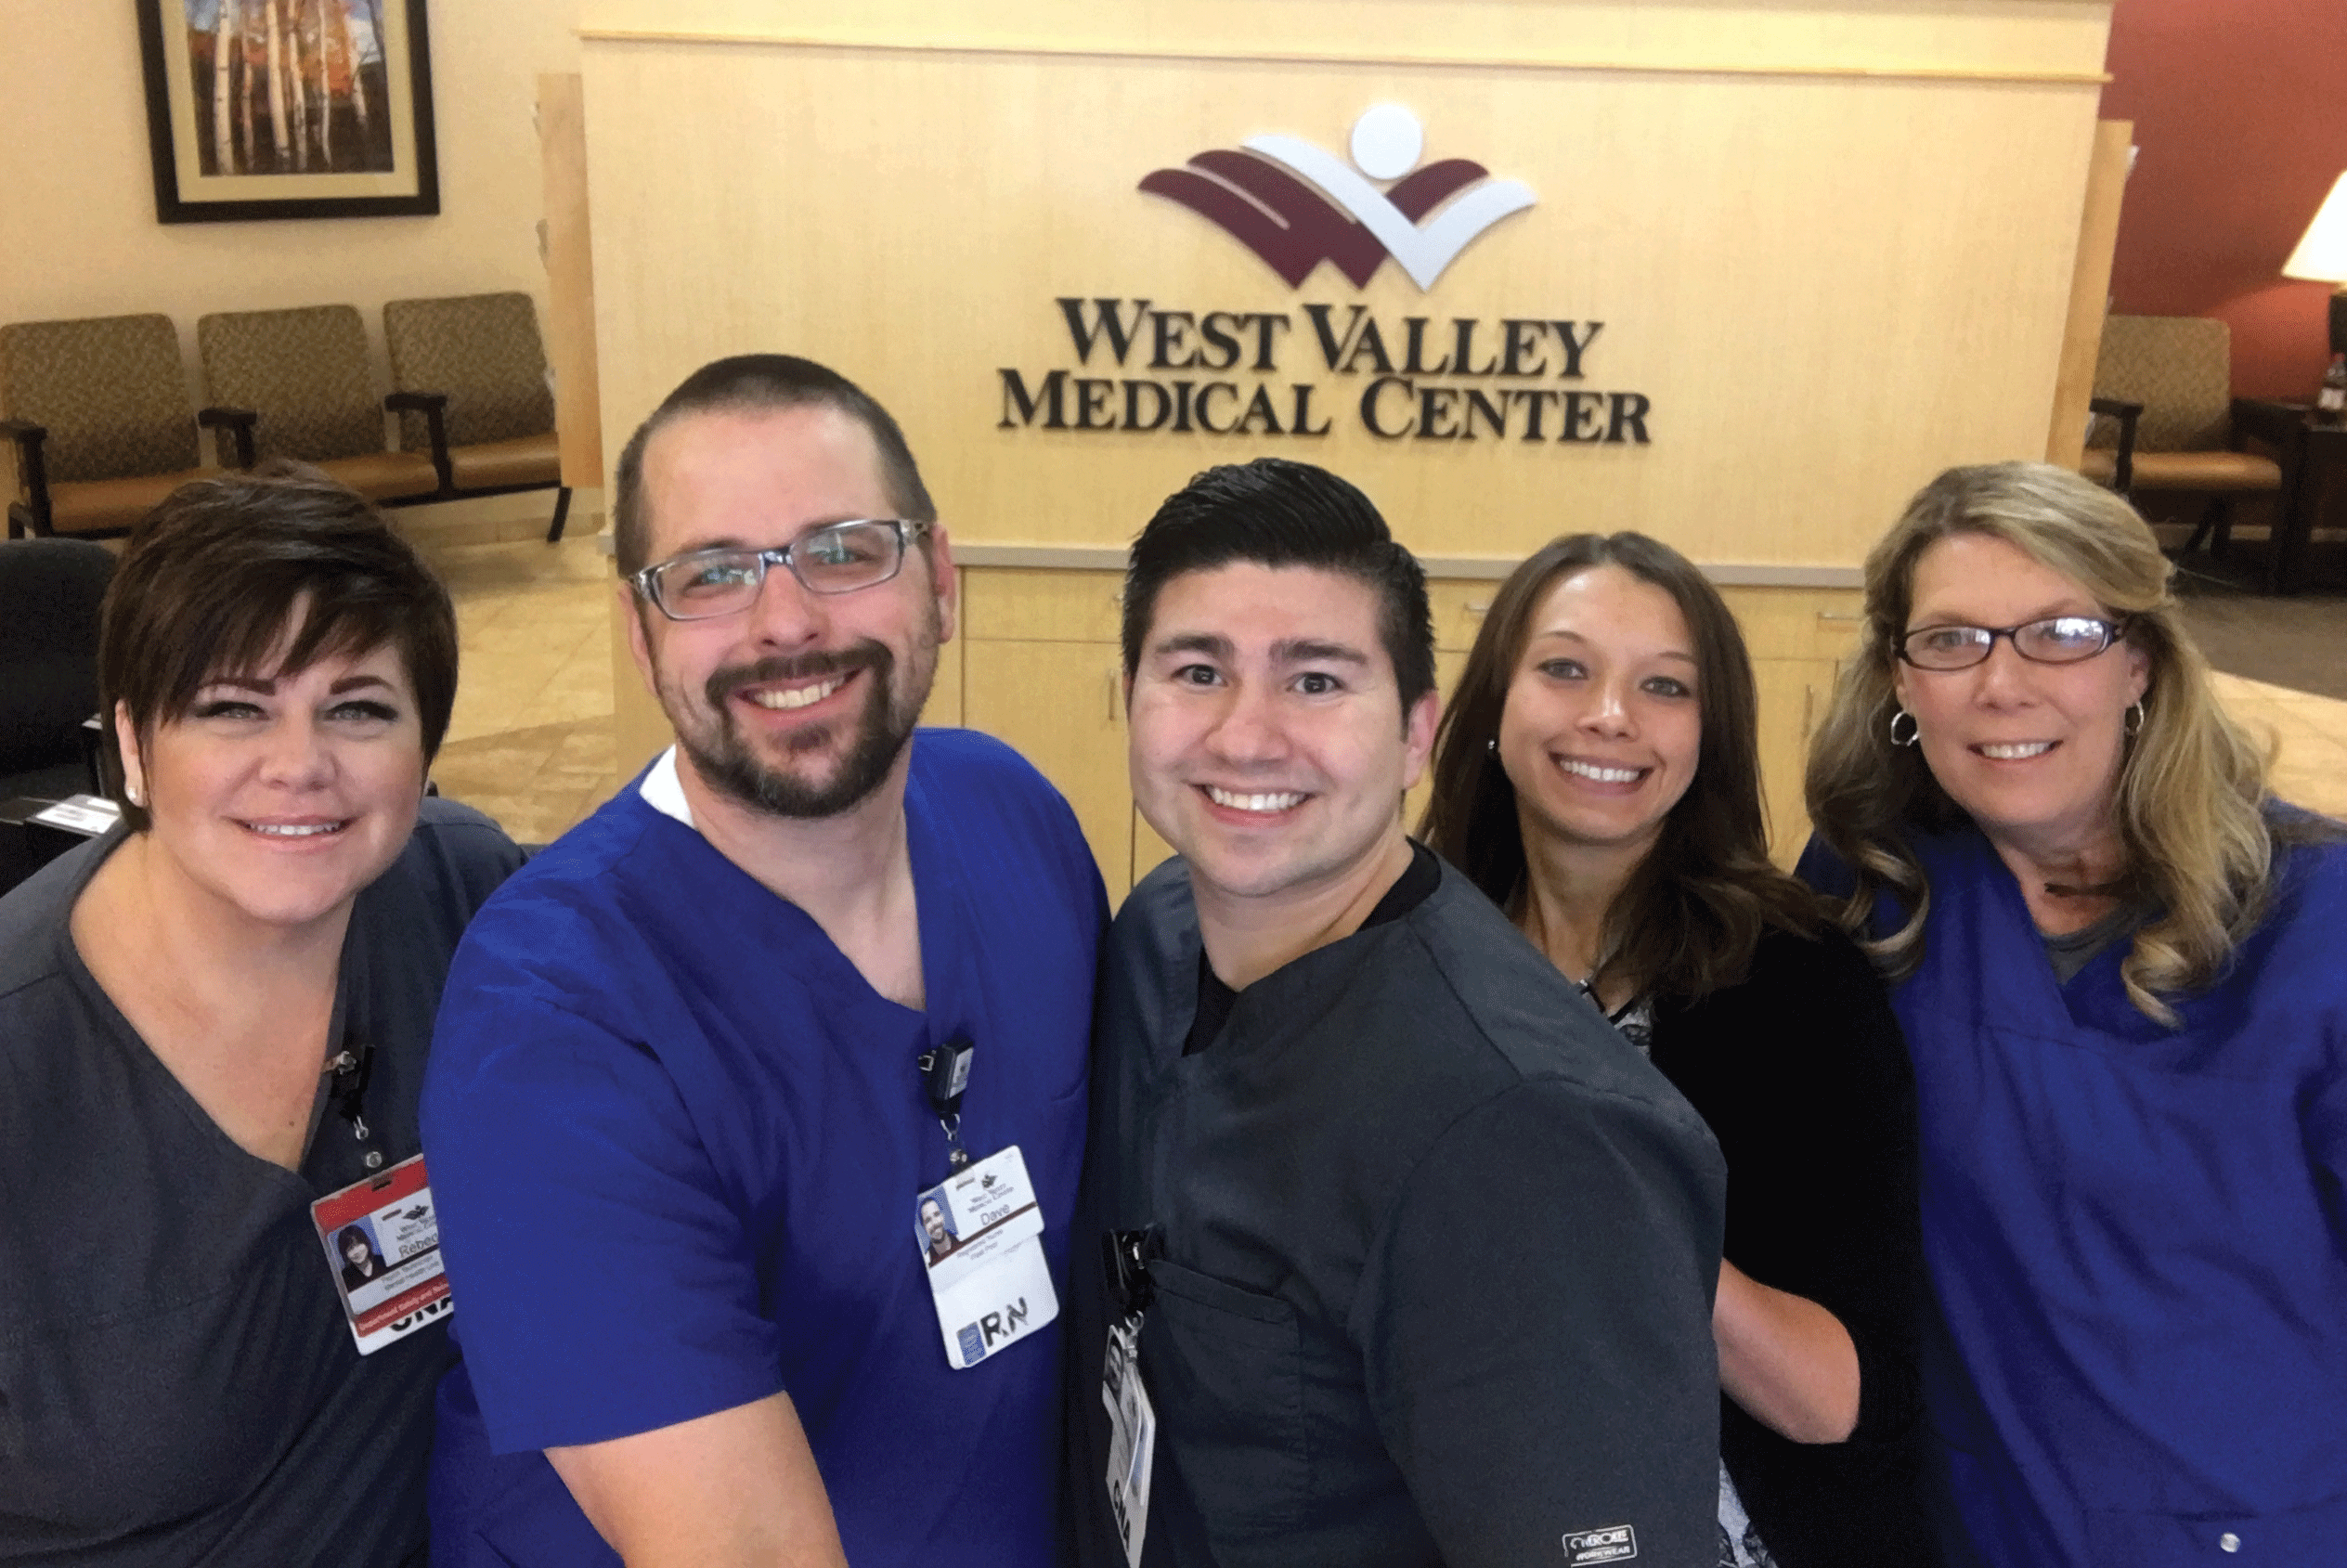 Five hospital caregivers standing in front of a West Valley Medical Center sign